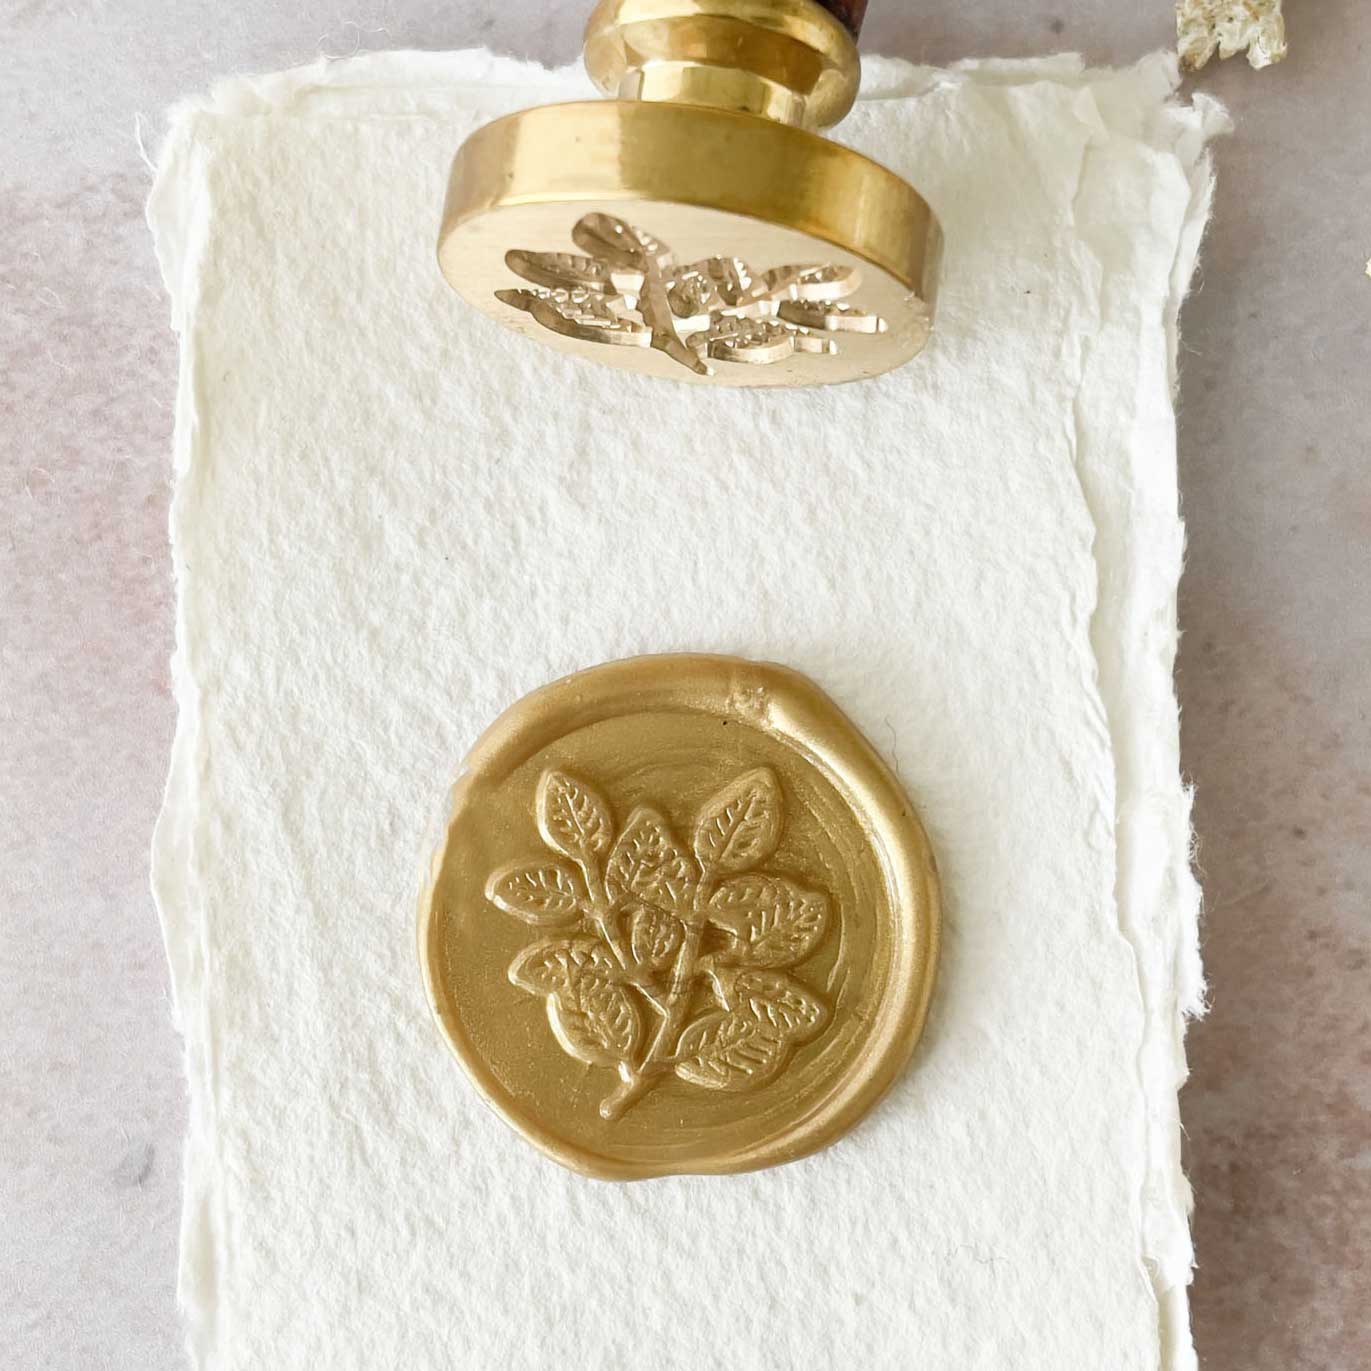 Flora Wax Stamp with a leaf pattern.  Natural botanical print wax seals to decorate wedding invitations, envelopes, gift packaging and stationery.  By The Natural Paper Company